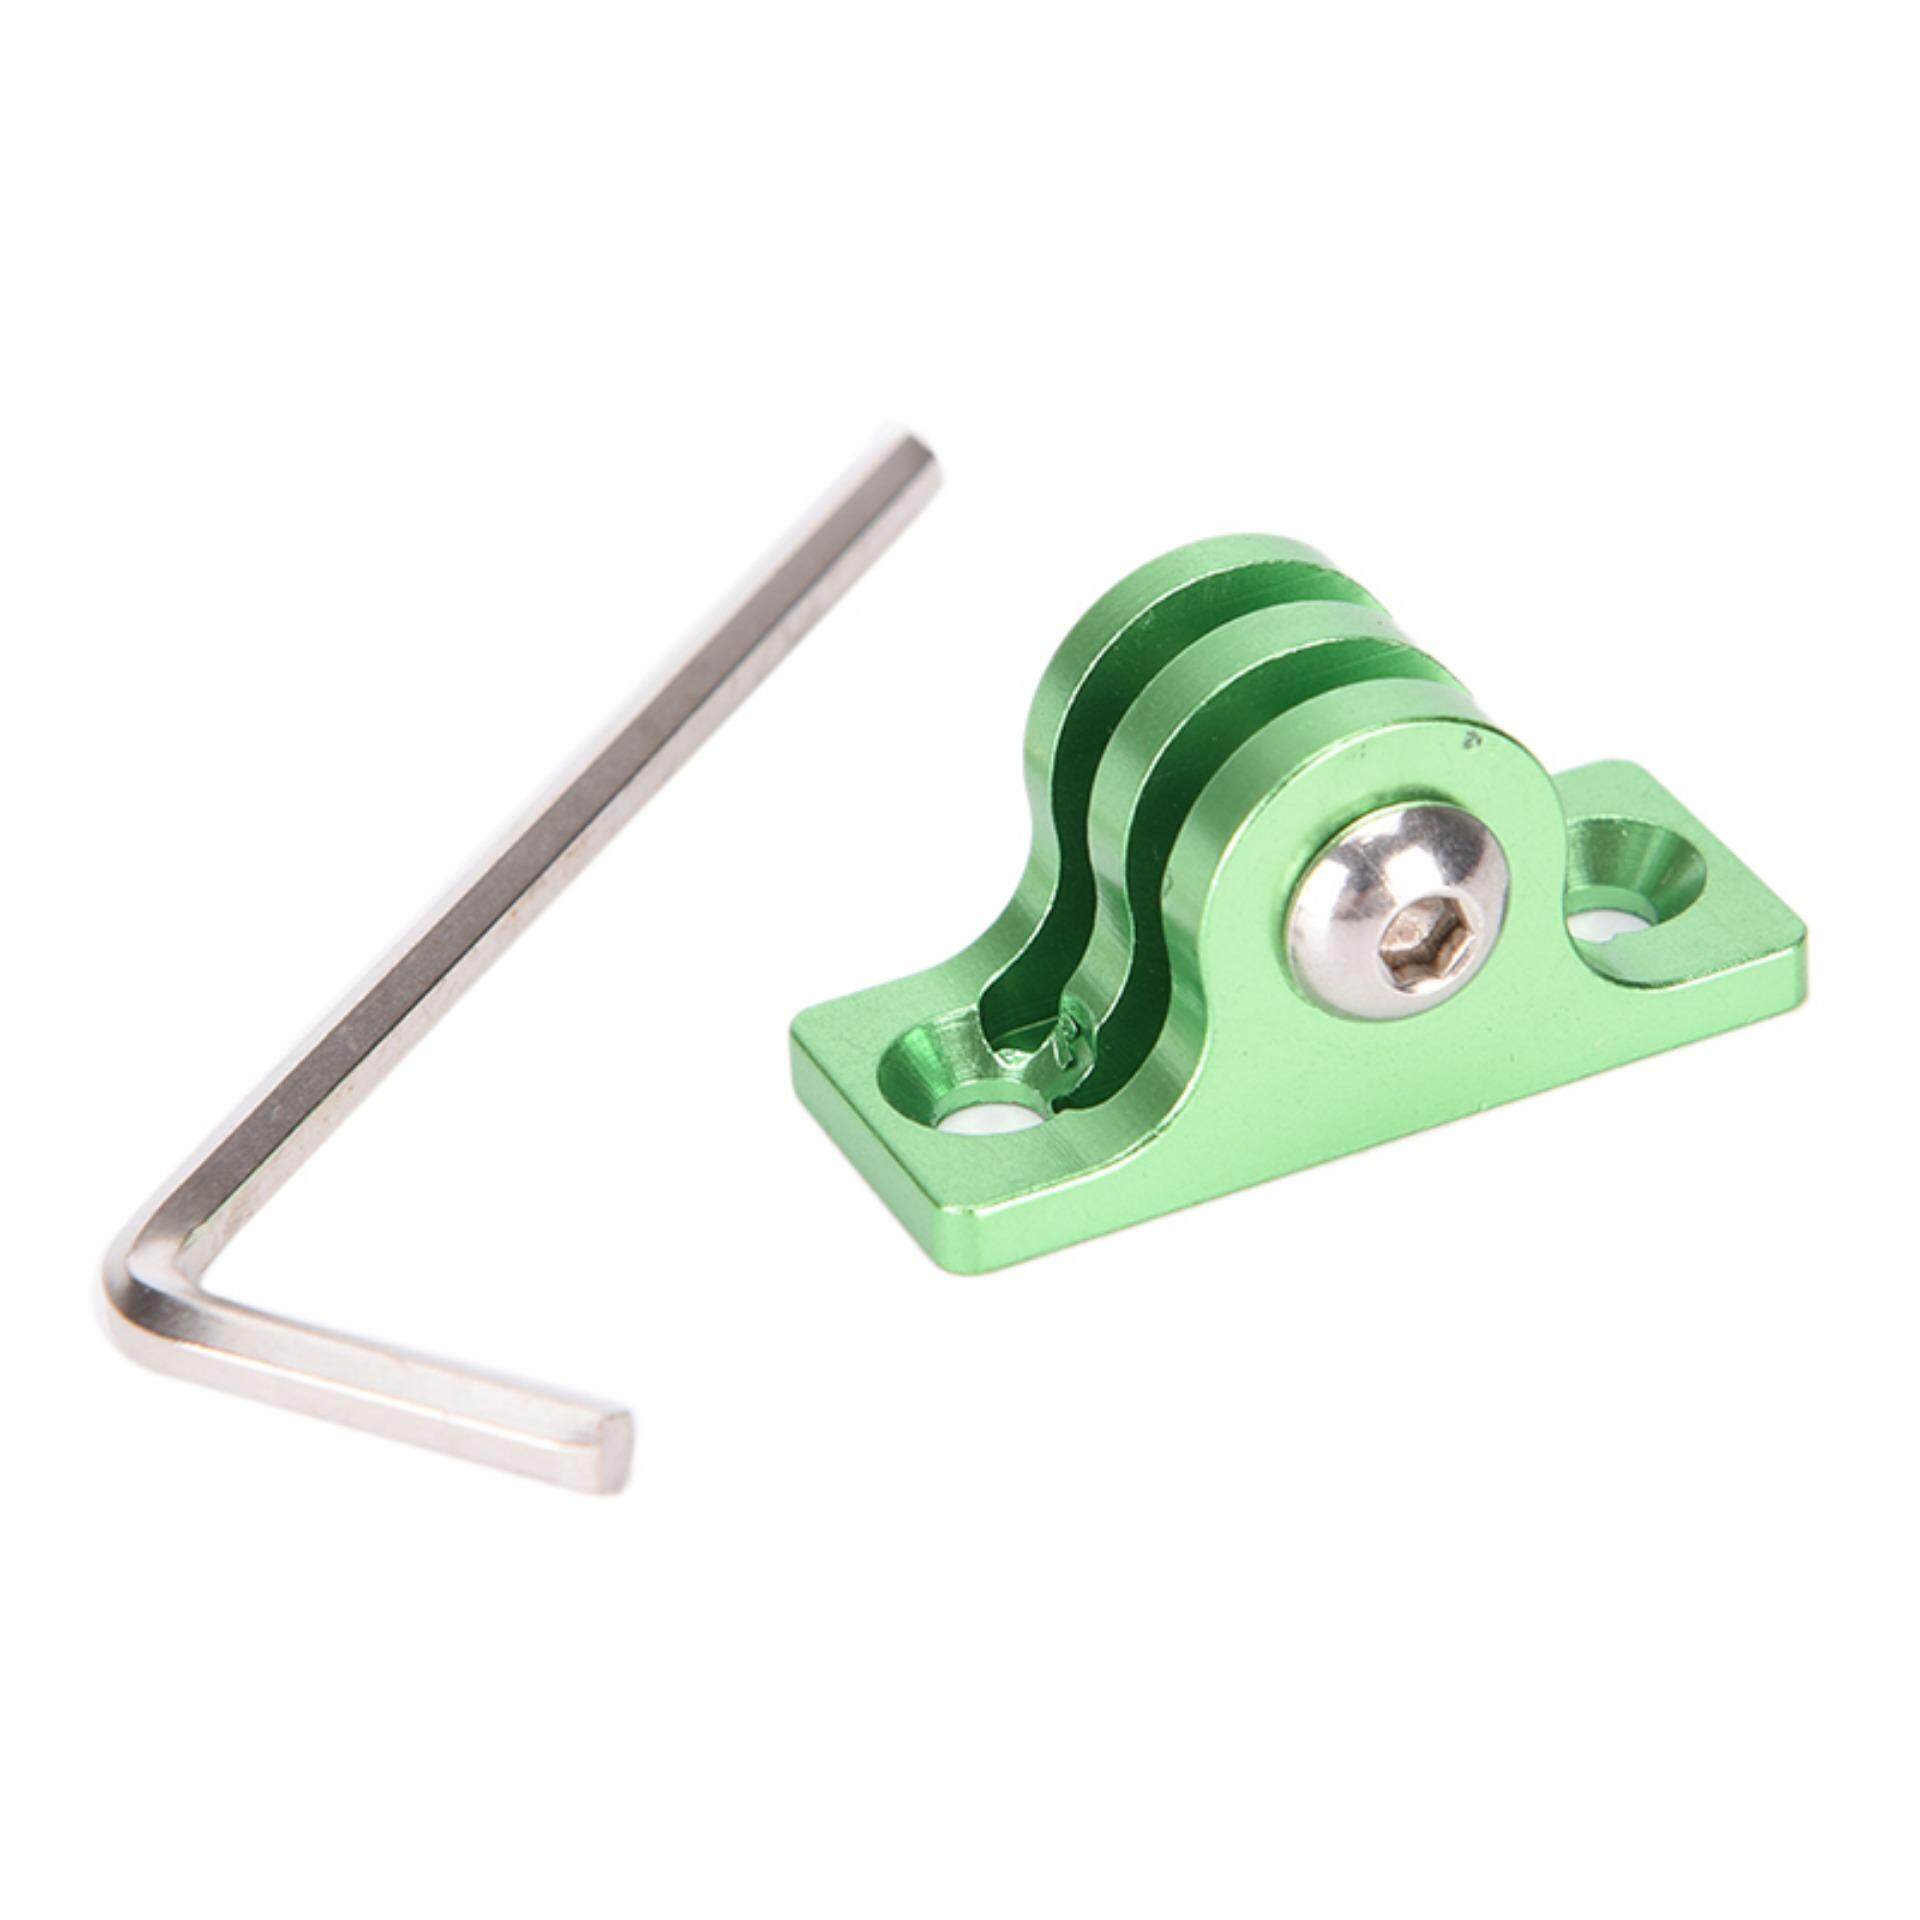 CNC Aluminum Alloy Tripod Adapter Mount for GoPro Hero+LCD 5 4S 4 3+3 Green